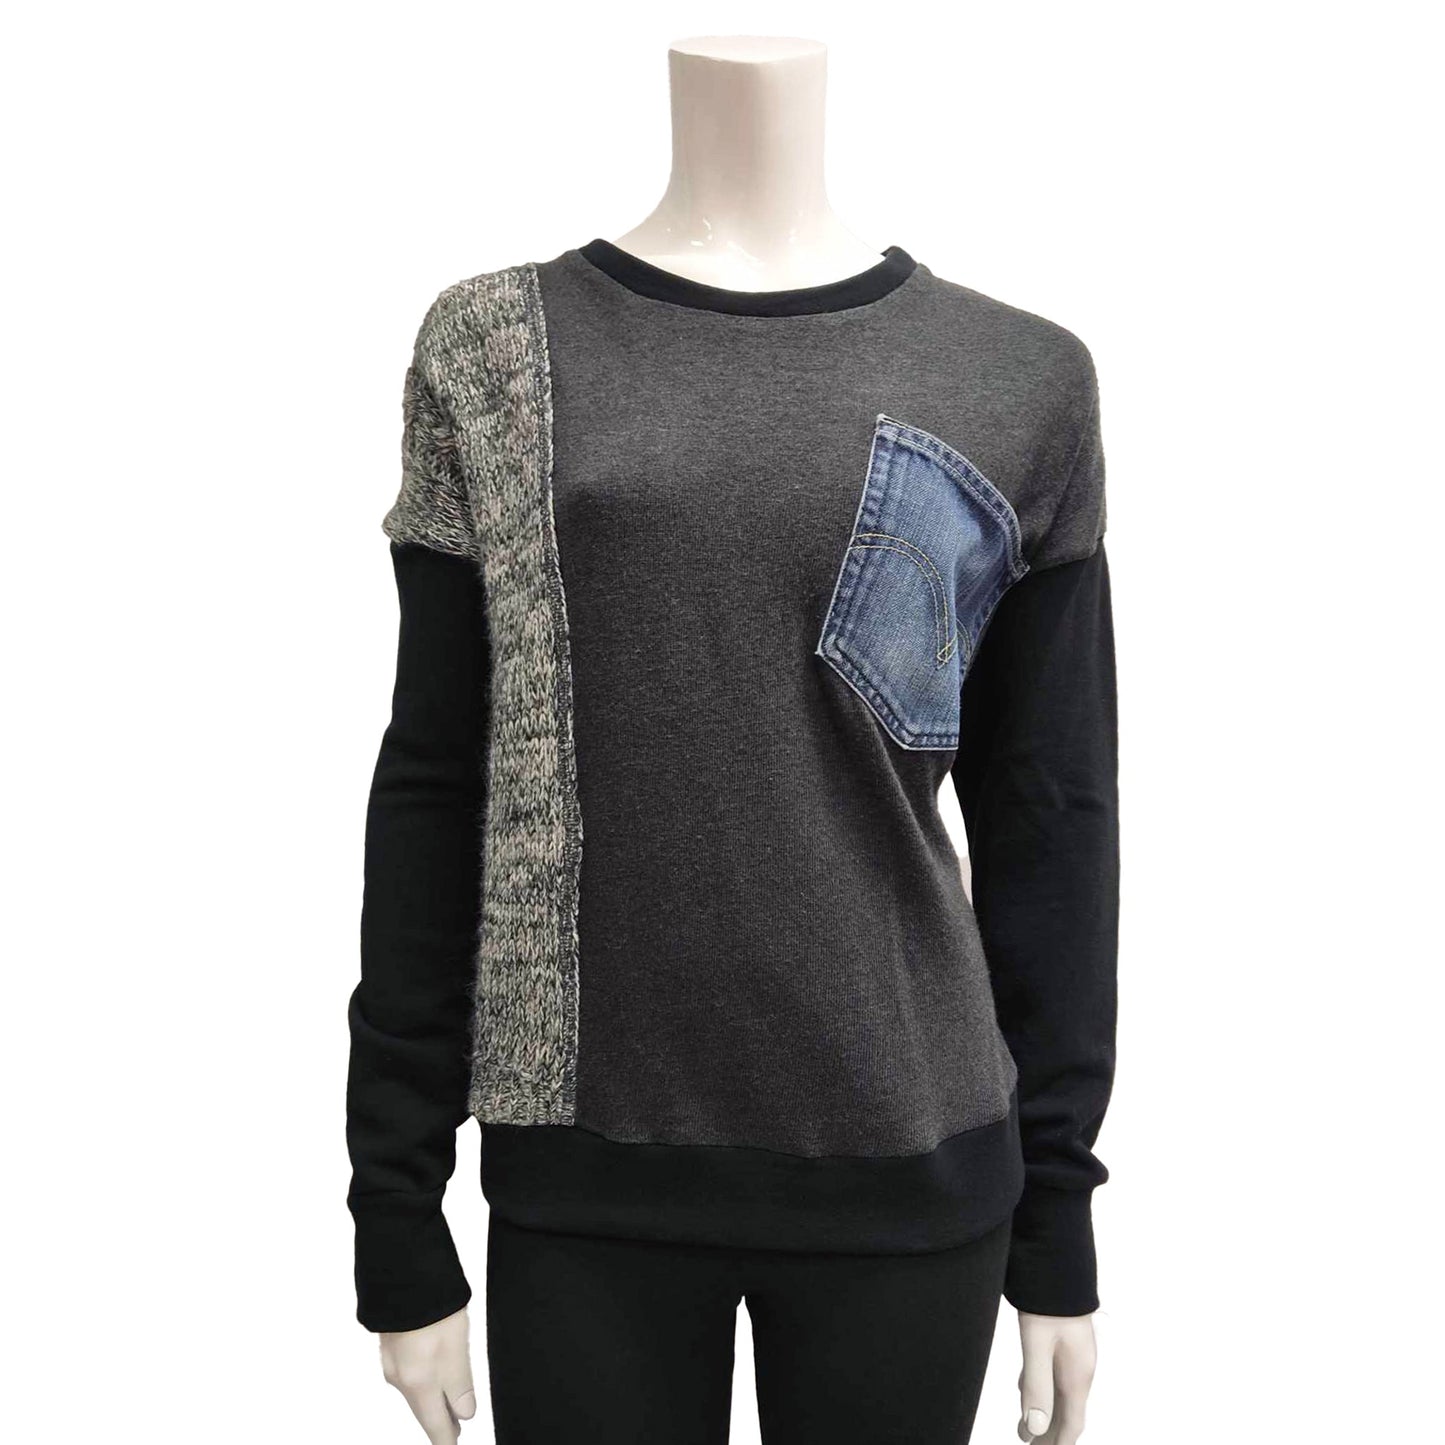 Upcycled sweater for women - STOCKHOLM|L Lt Grey/Gey